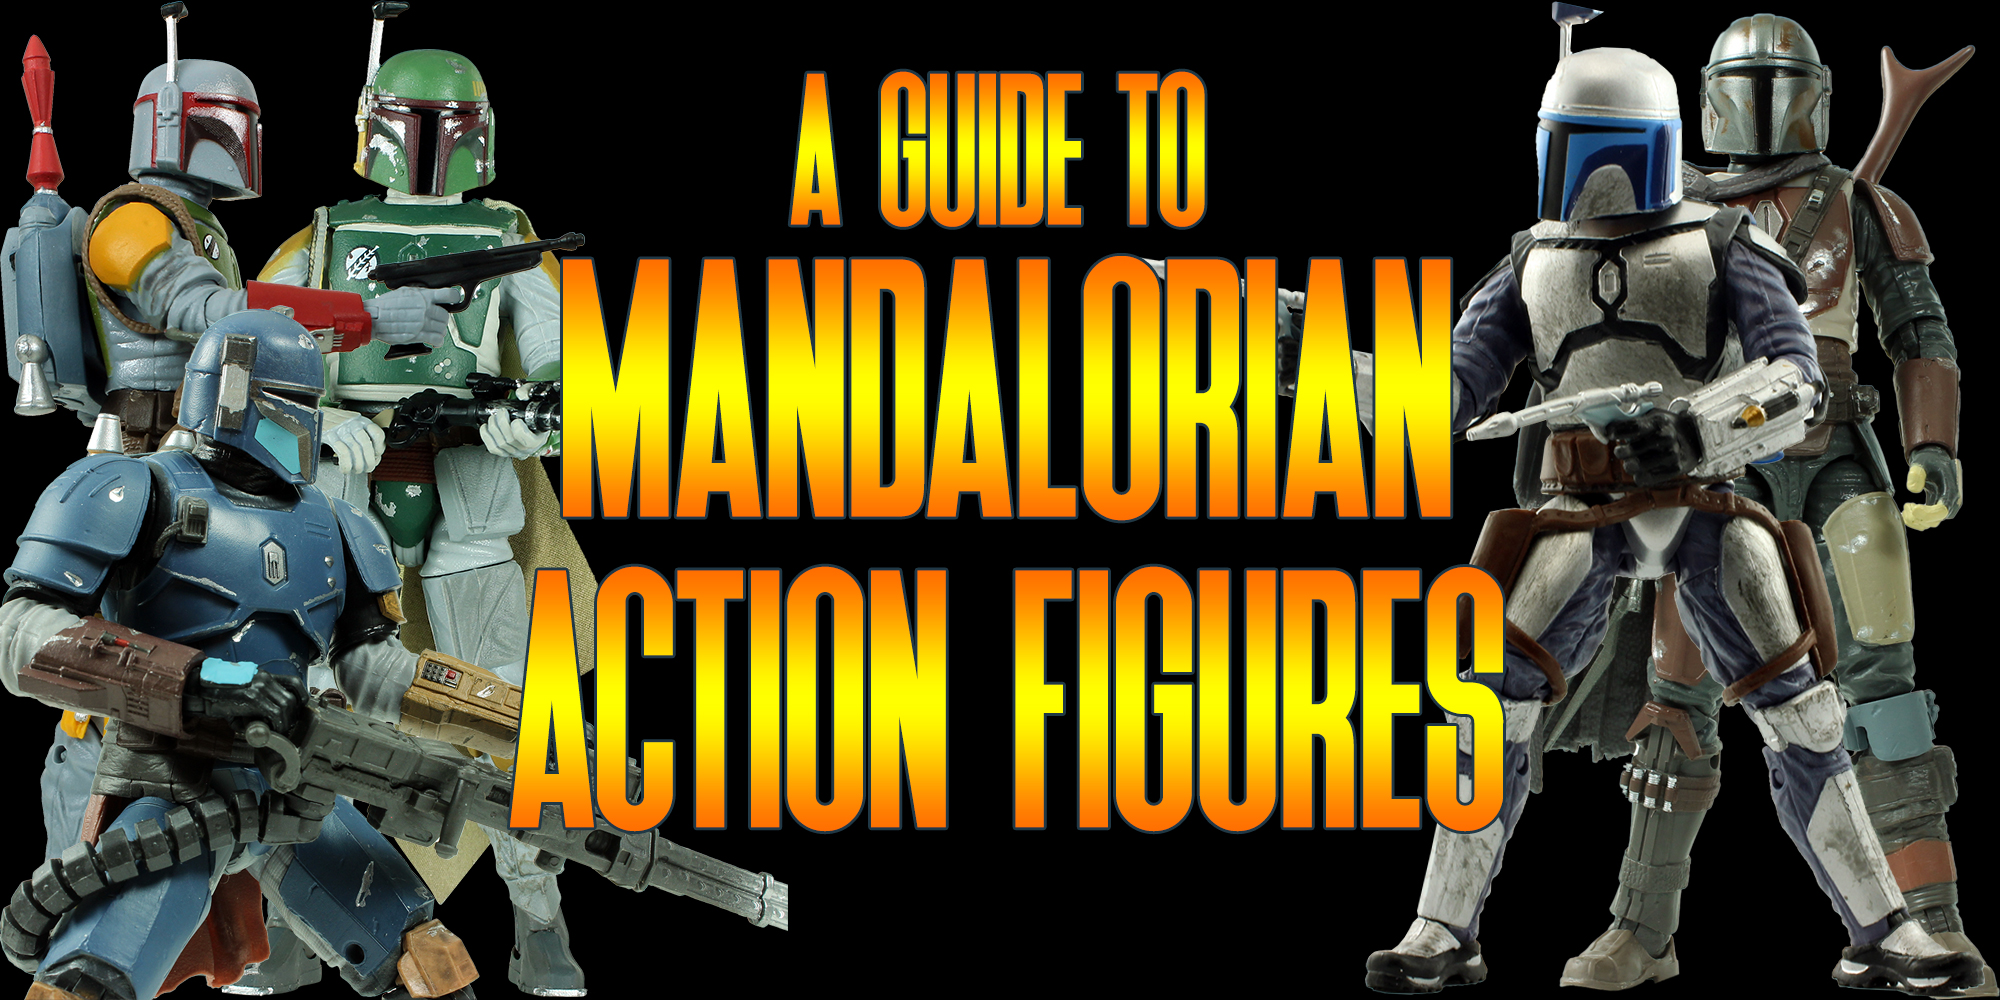 A Guide To Mandalorian Action Figures